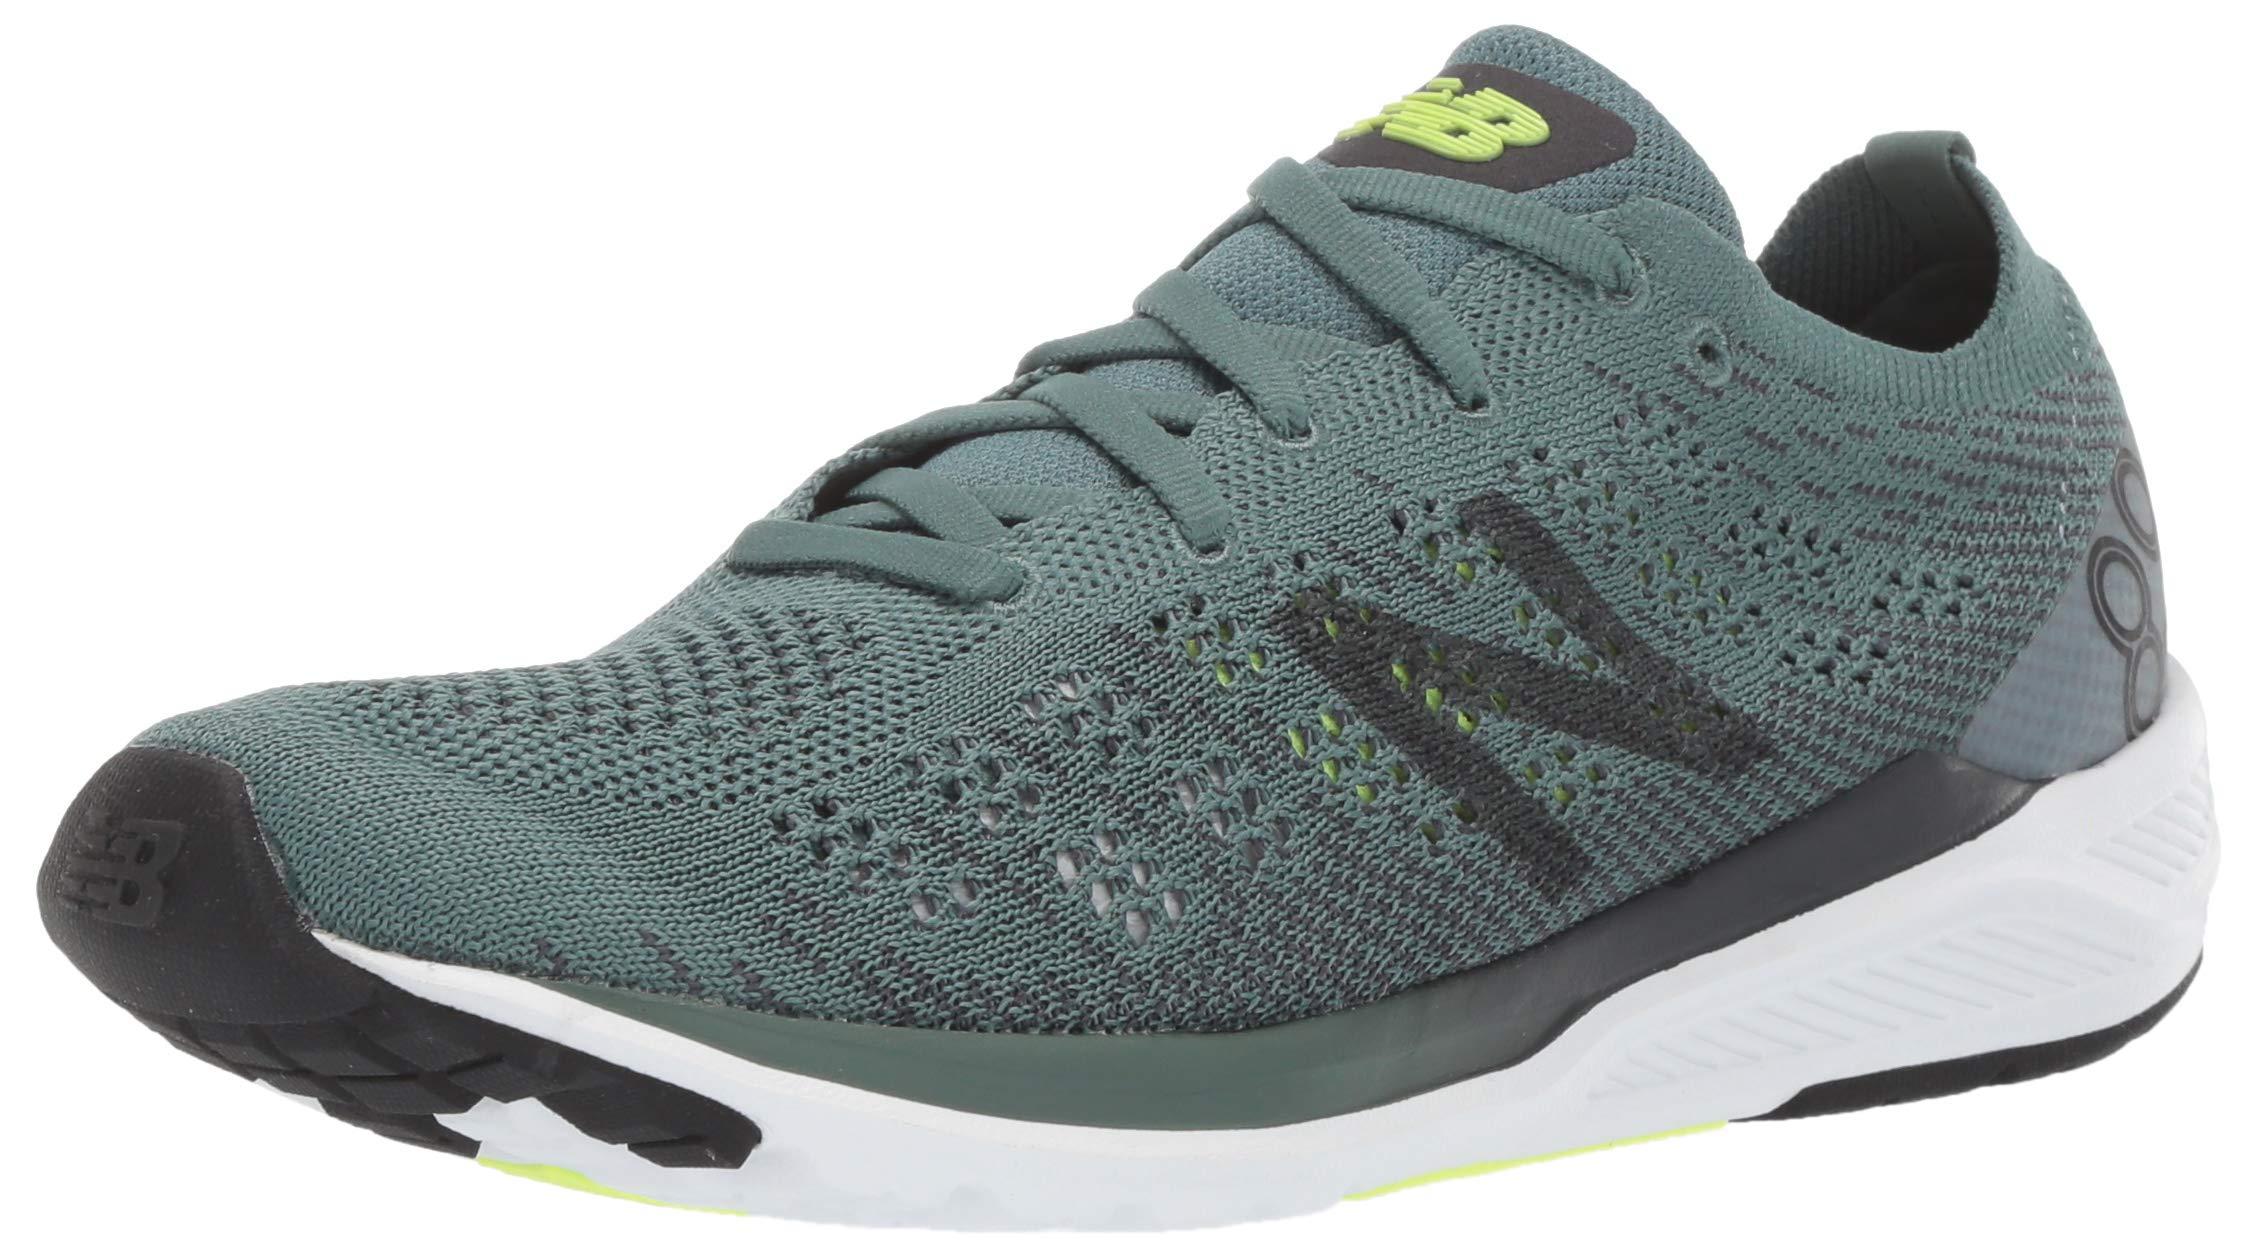 New Balance Rubber 890v7 Running Shoe, Dark Agave/orca/bleached Lime ...